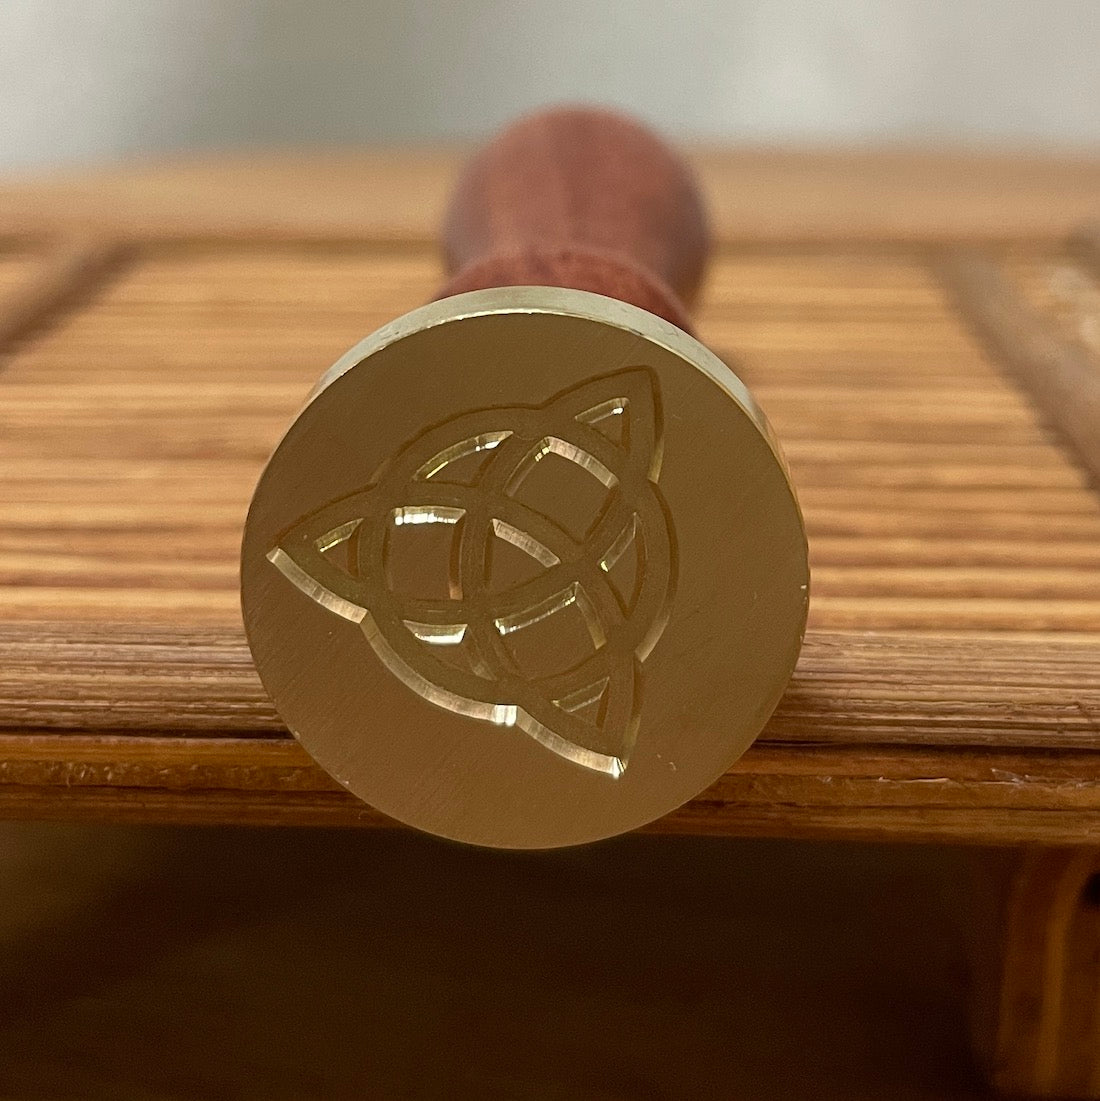 Wax Seal Stamps